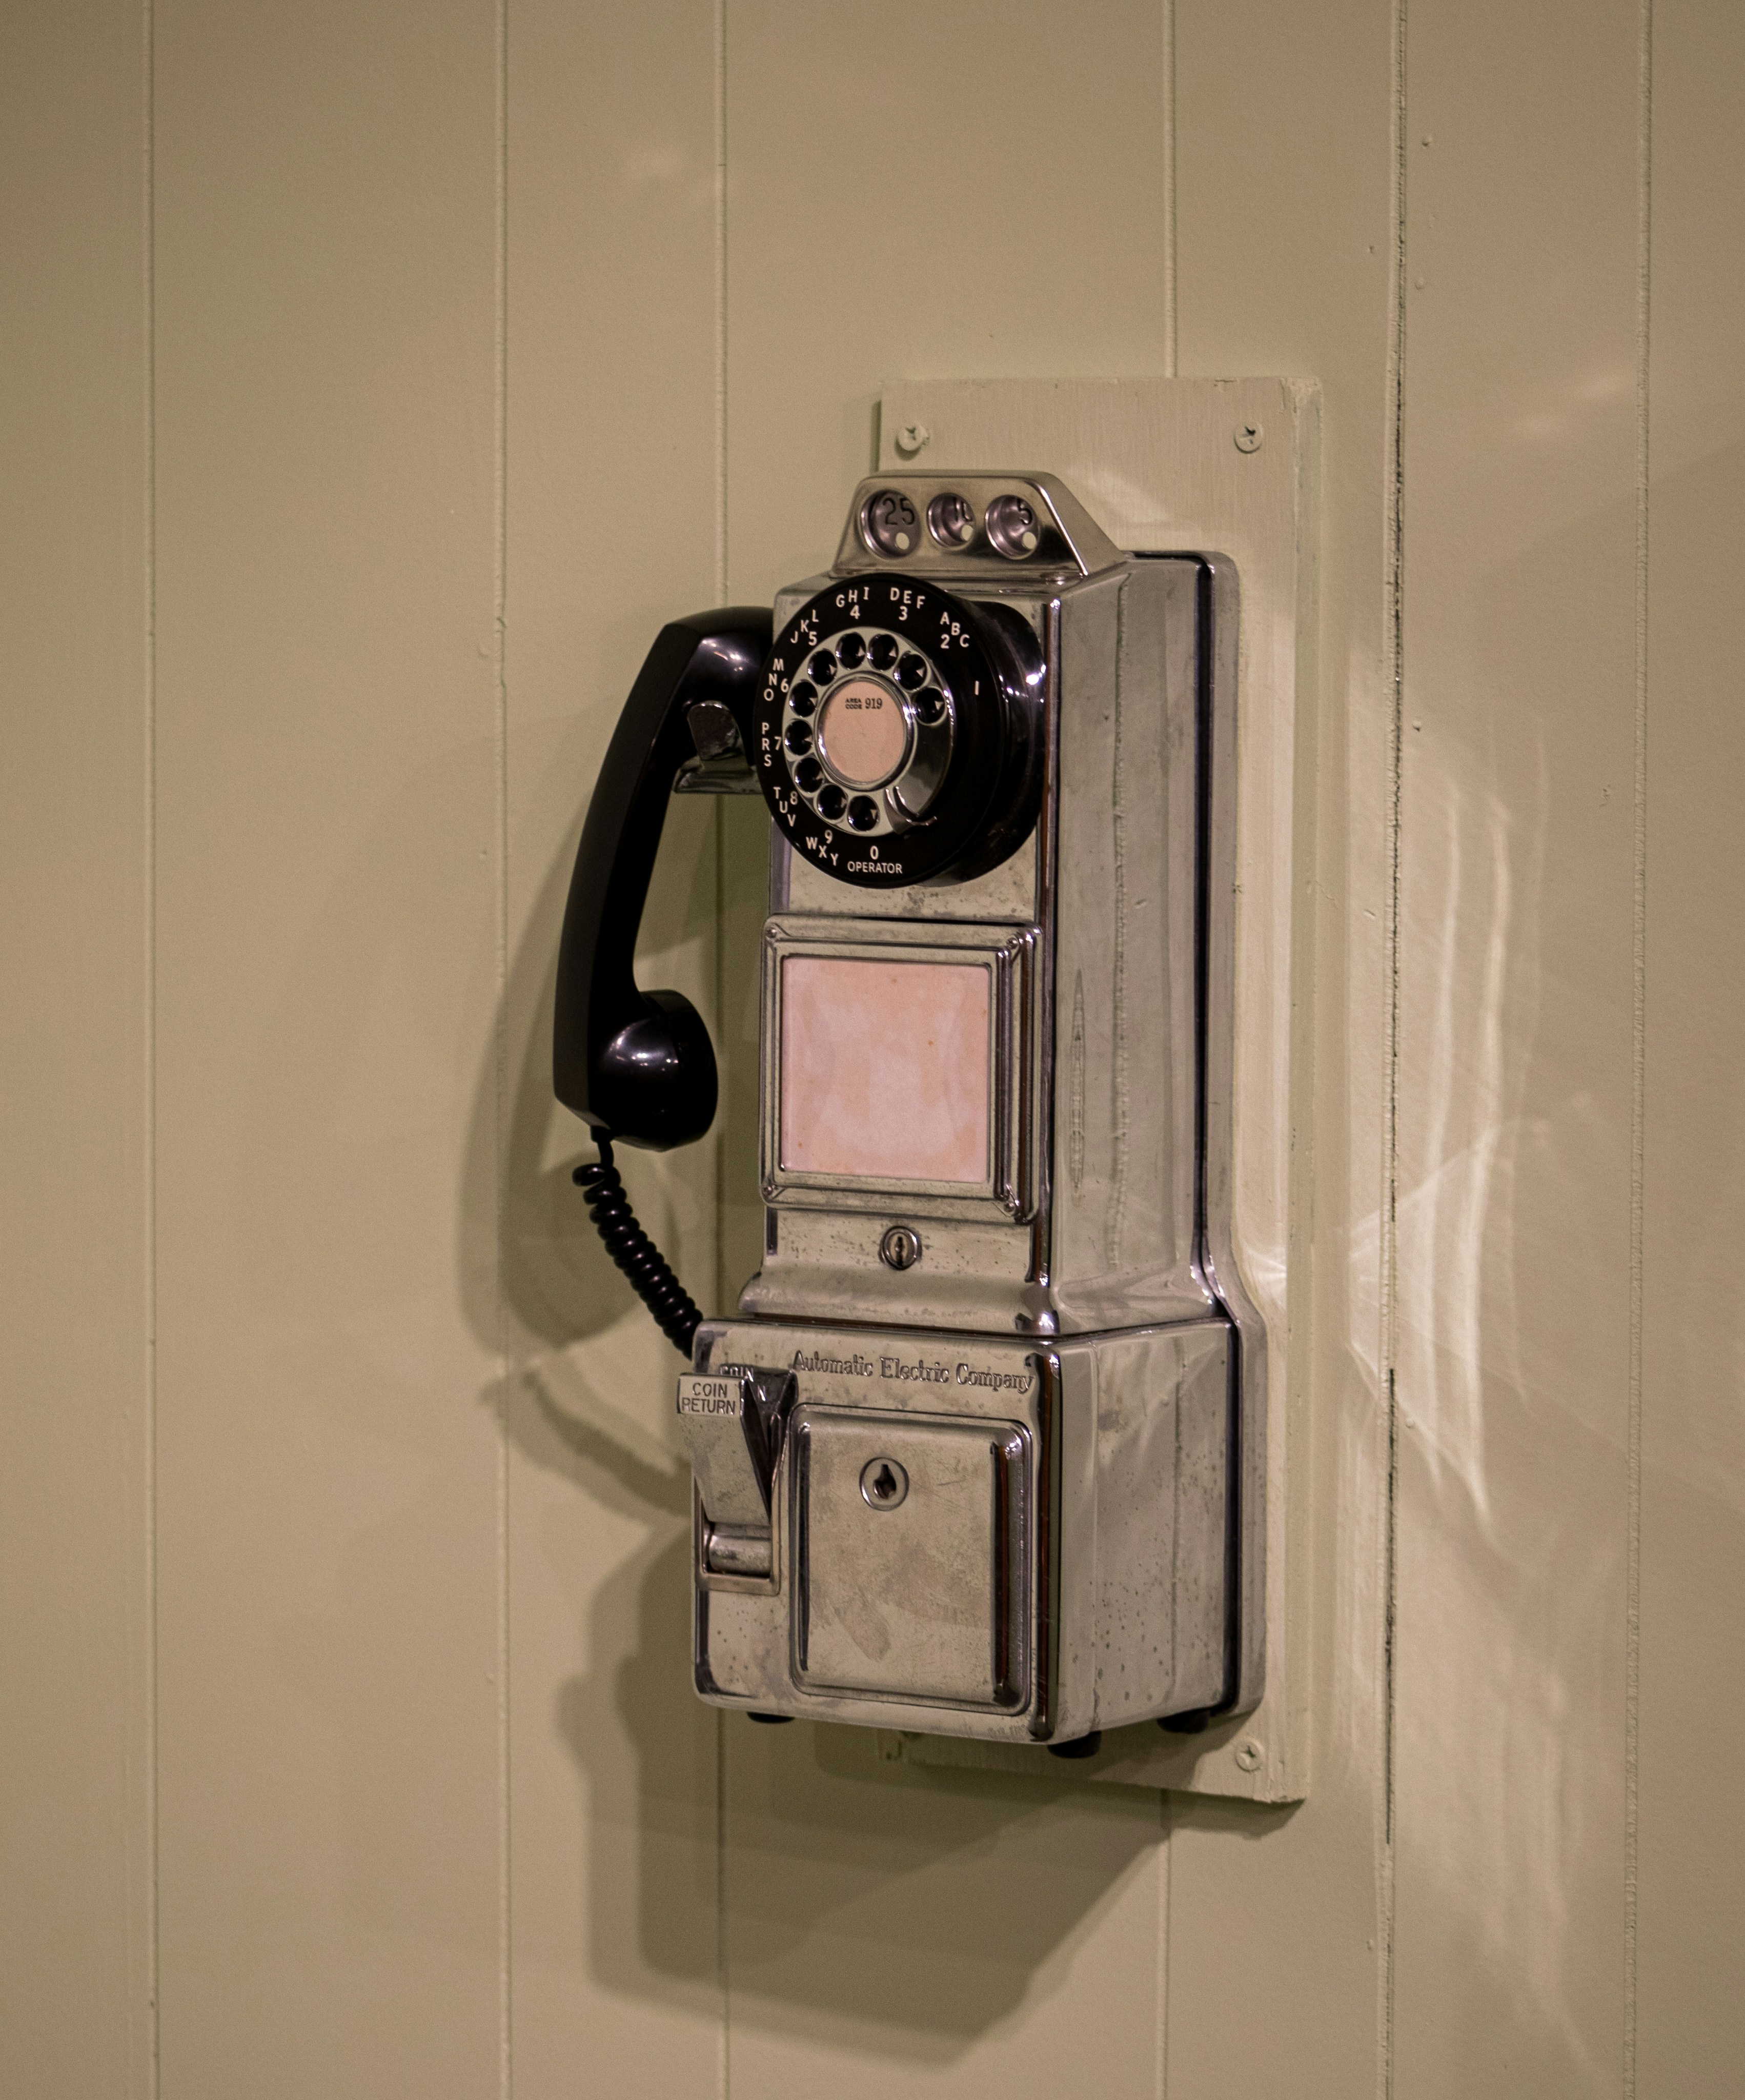 Antique payphone located at the telephone museum in Maitland FL.